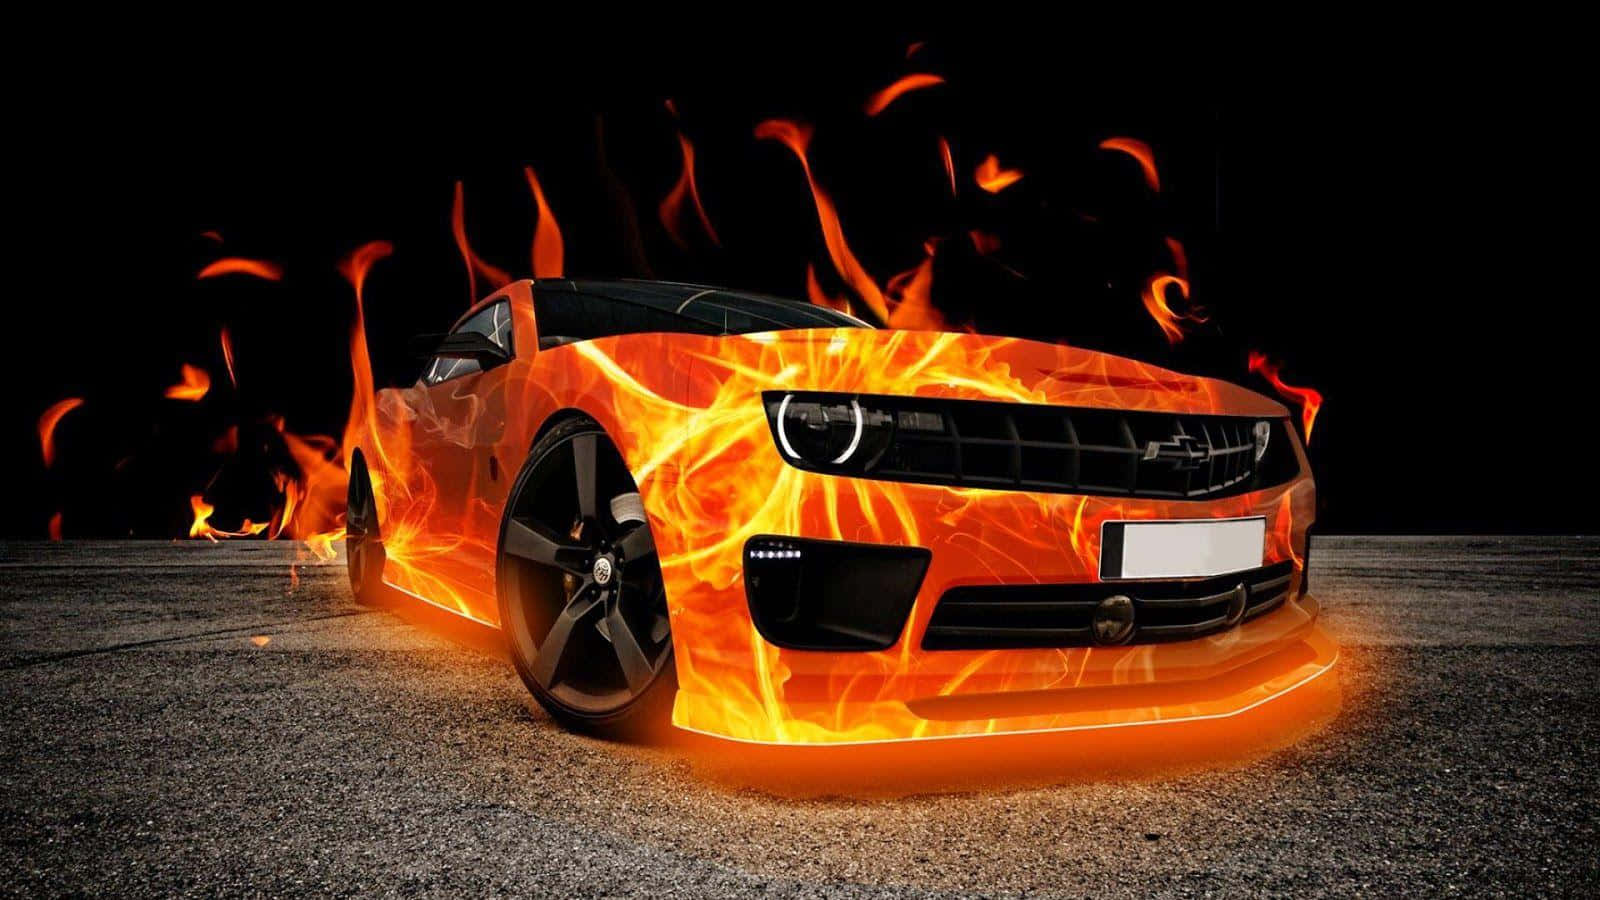 A Car With Flames On It In The Dark Wallpaper